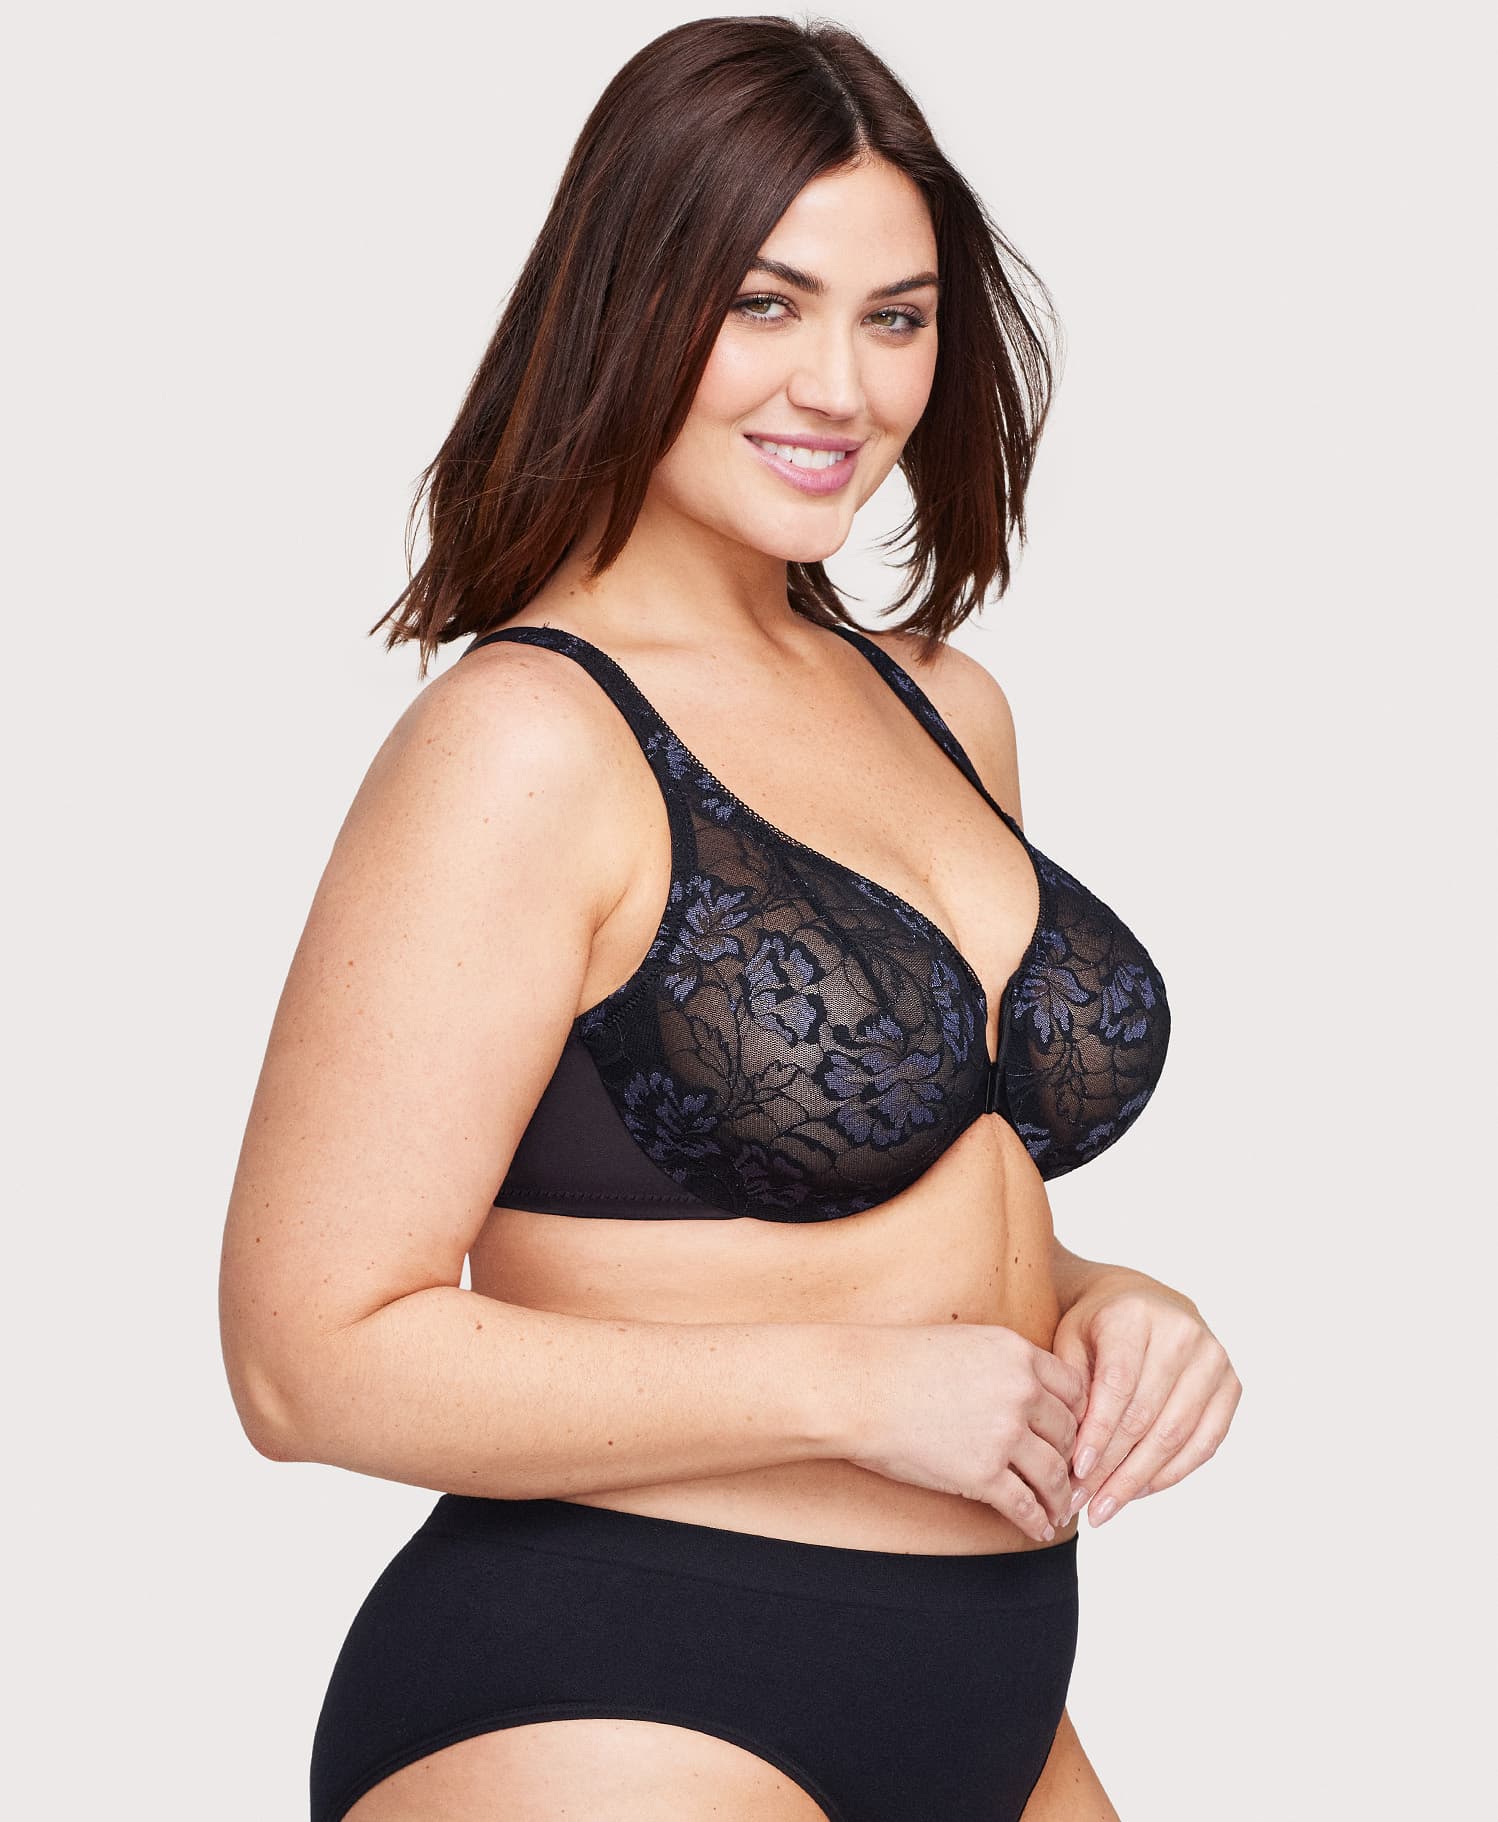 Glamorise Womens Lacey T-back Front-closure Wonderwire Underwire Bra 9246  Cappuccino 44f : Target